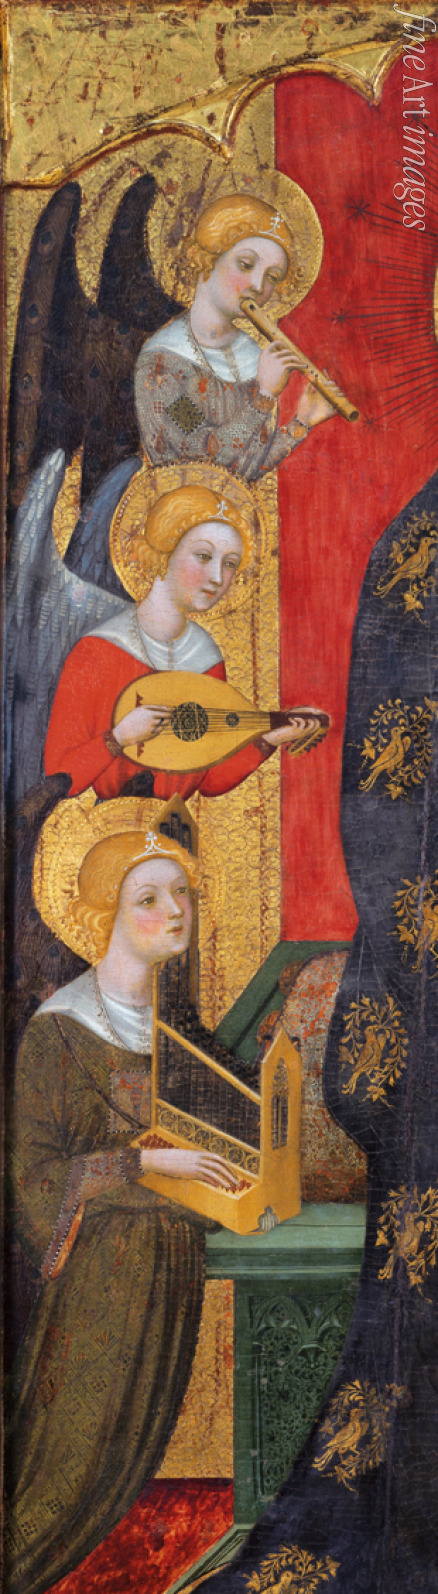 Serra Pere - Madonna with Angels Playing Music (Detail)